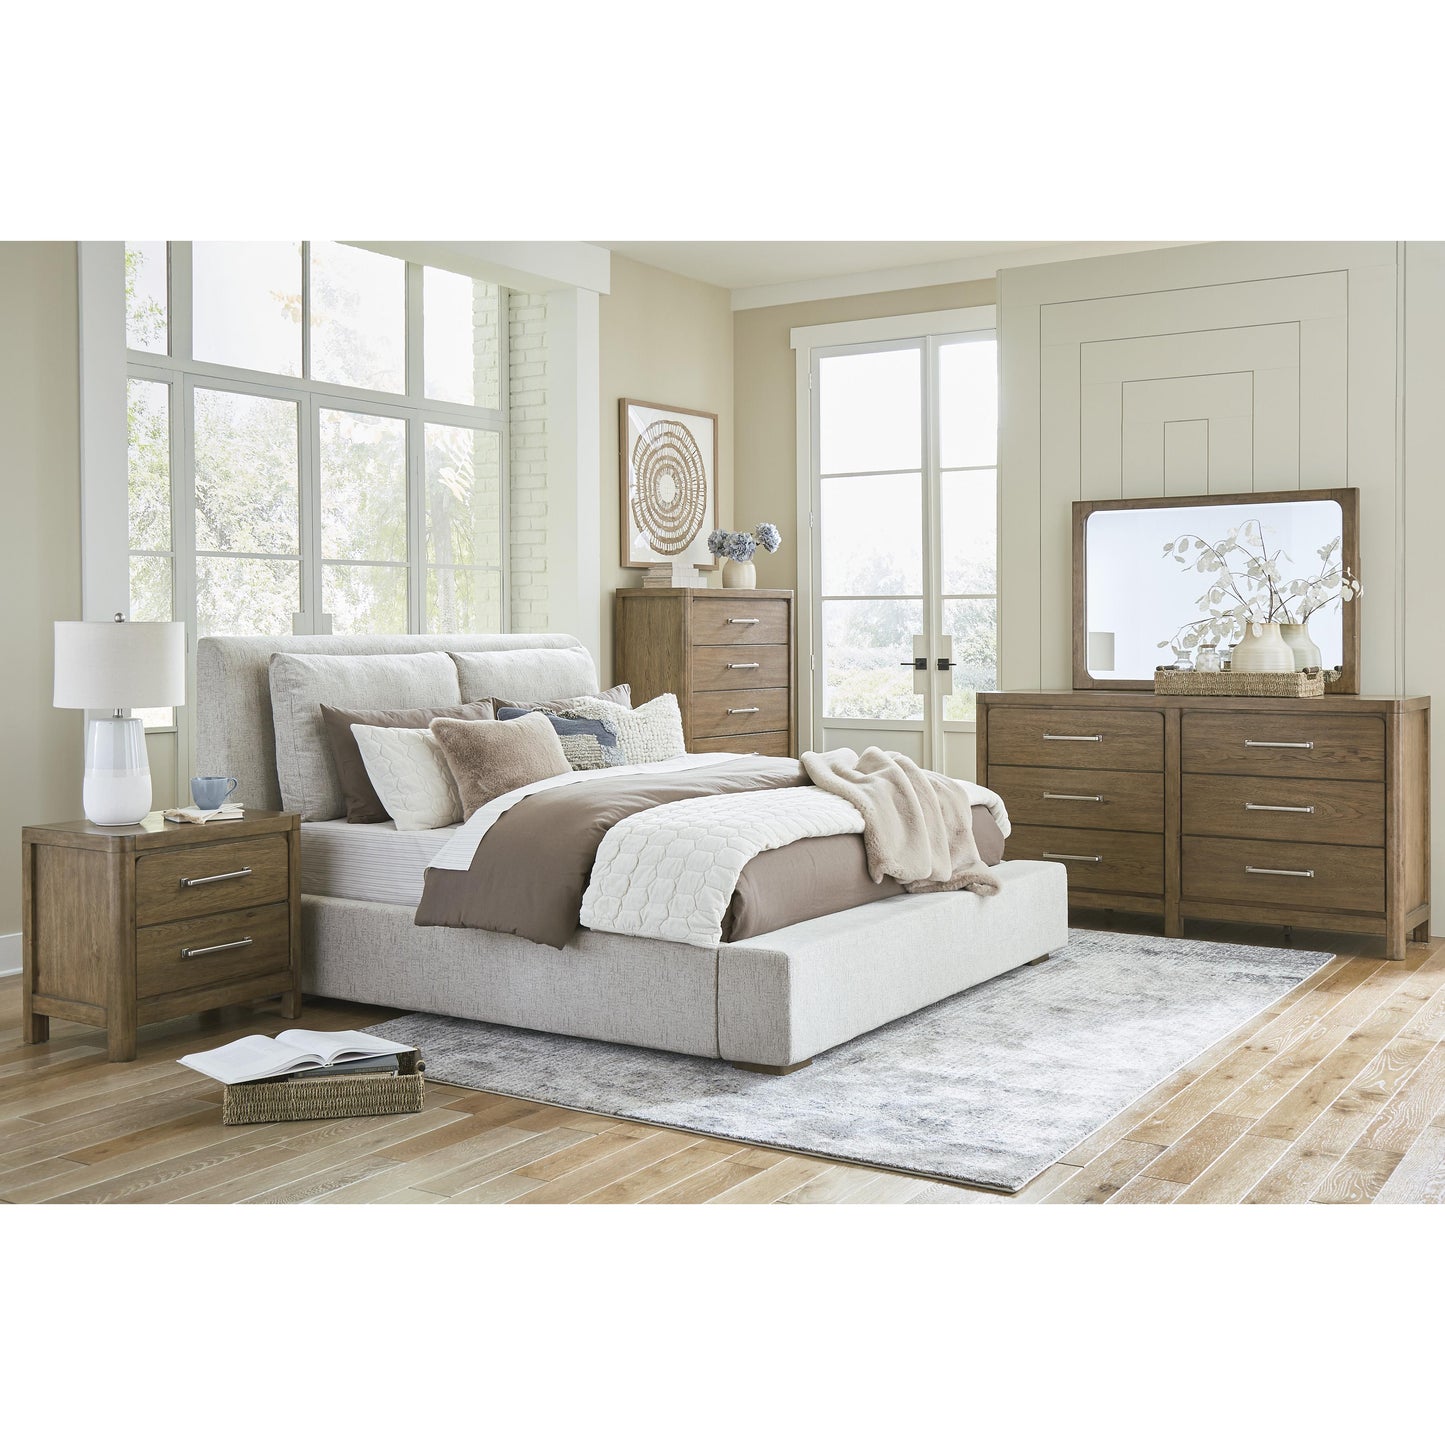 Signature Design by Ashley Cabalynn Queen Upholstered Bed B974-77/B974-74 IMAGE 8